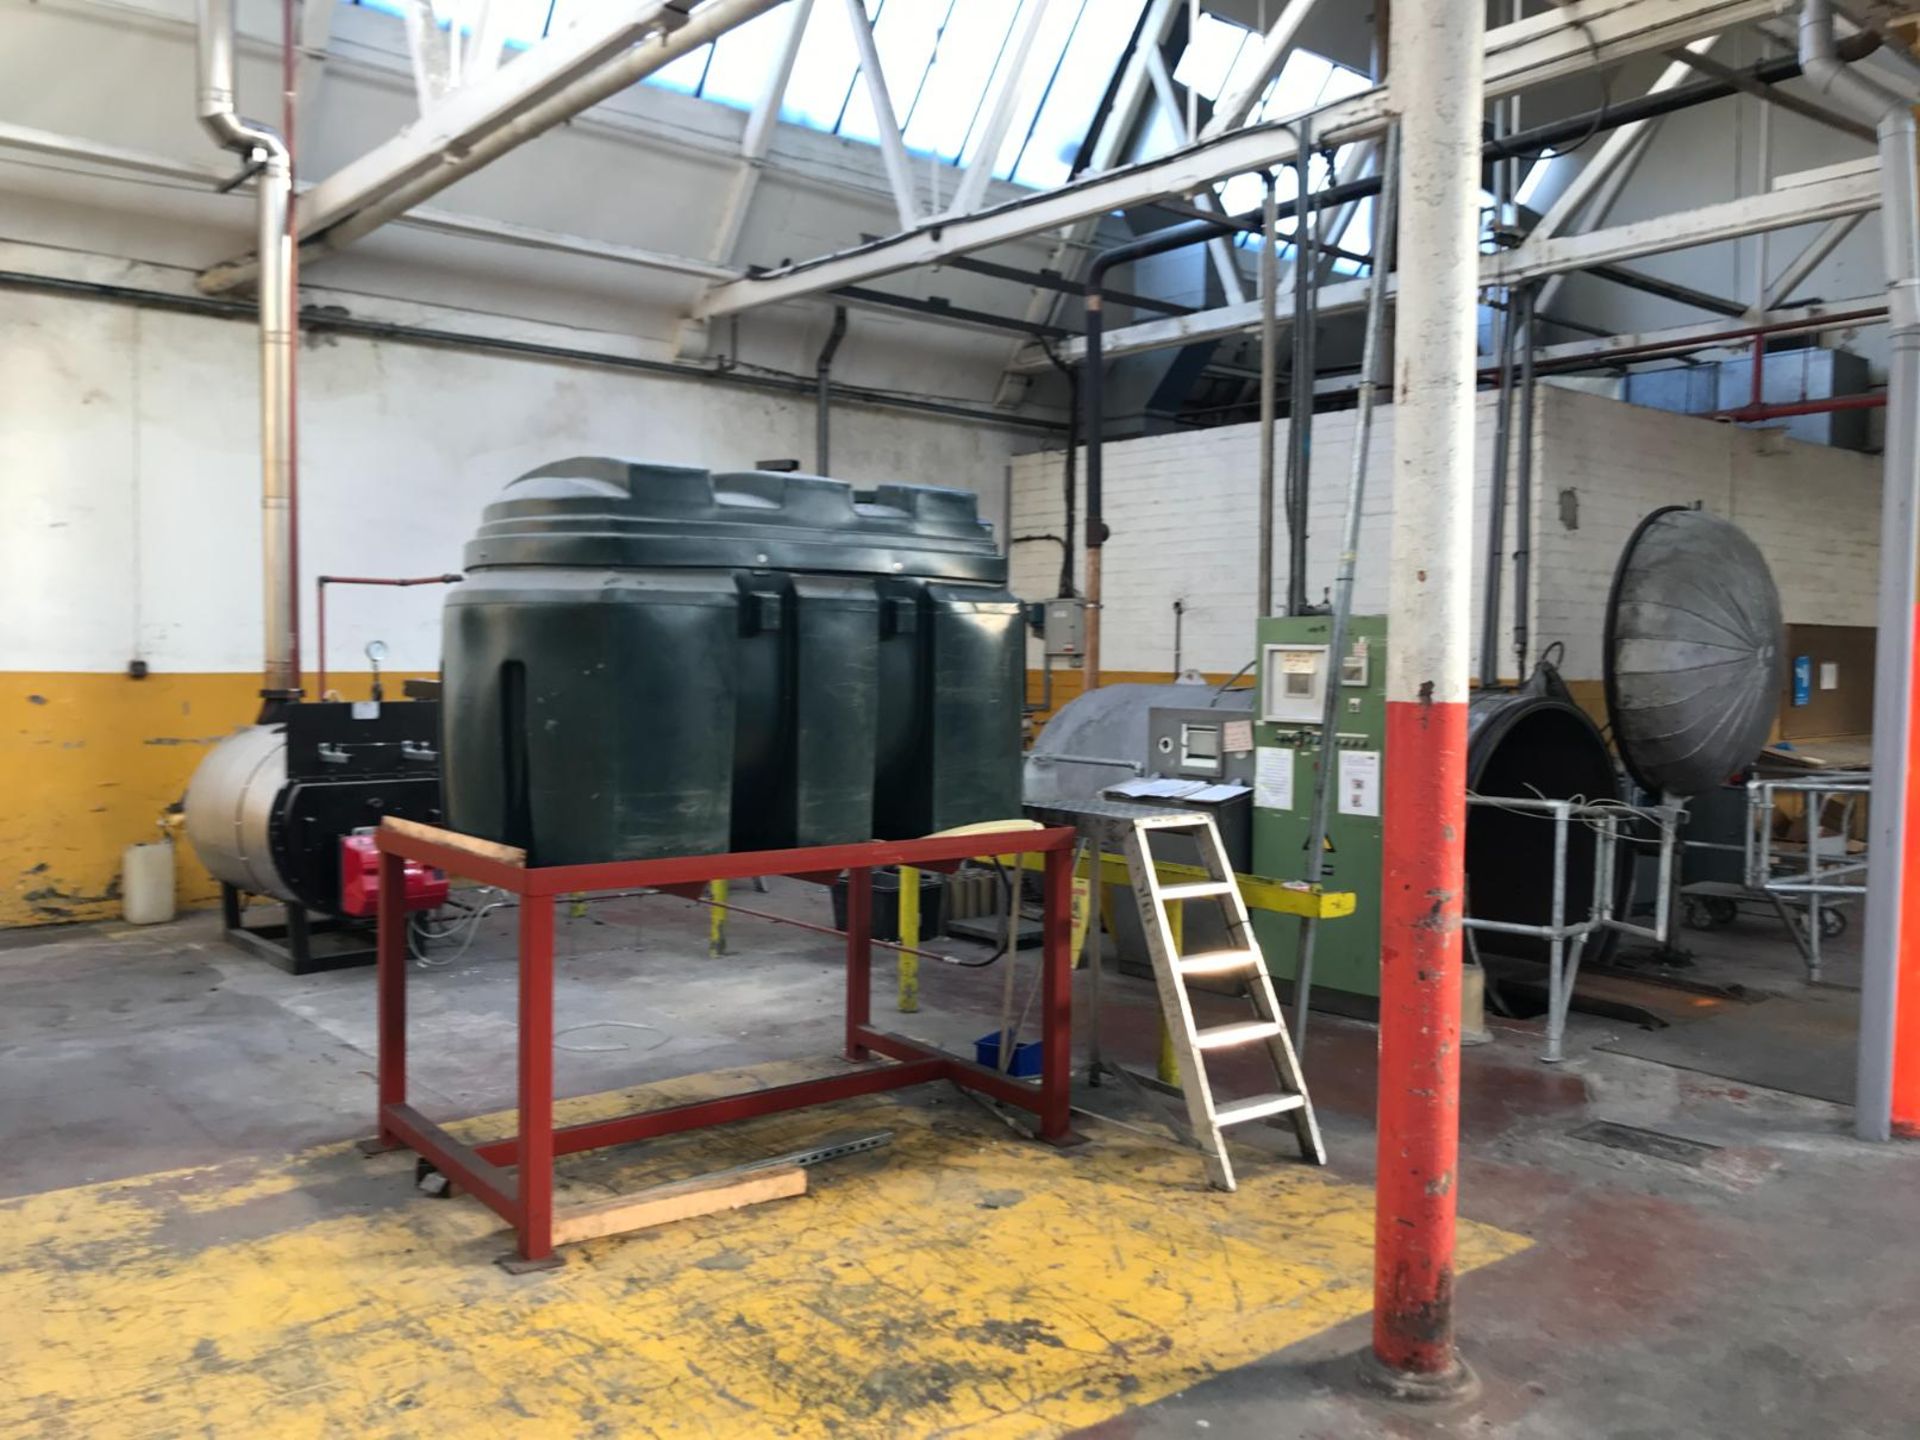 Welker autoclave with Bradlee boiler, oil tank and pump